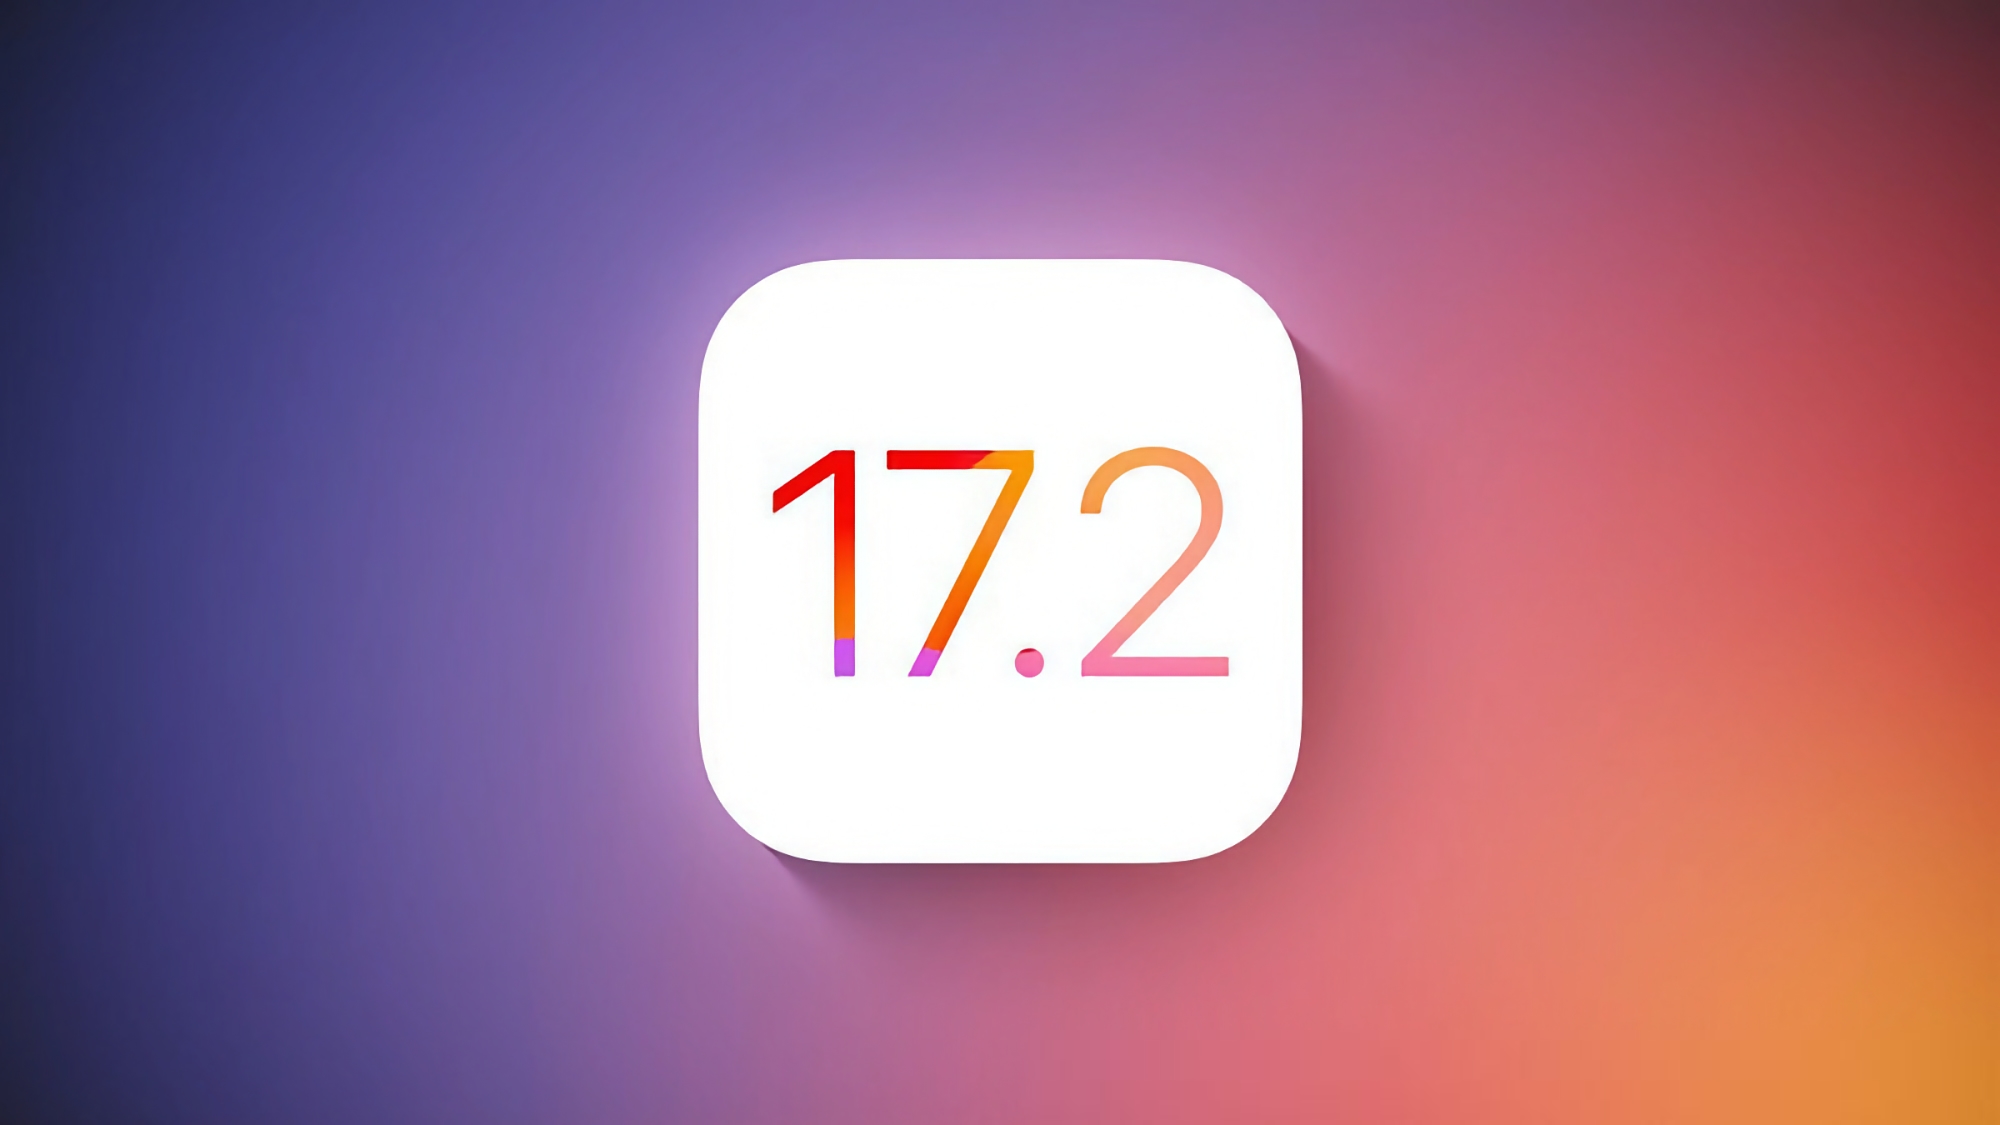 Apple has released the public beta of iOS 17.2 with the Journal app